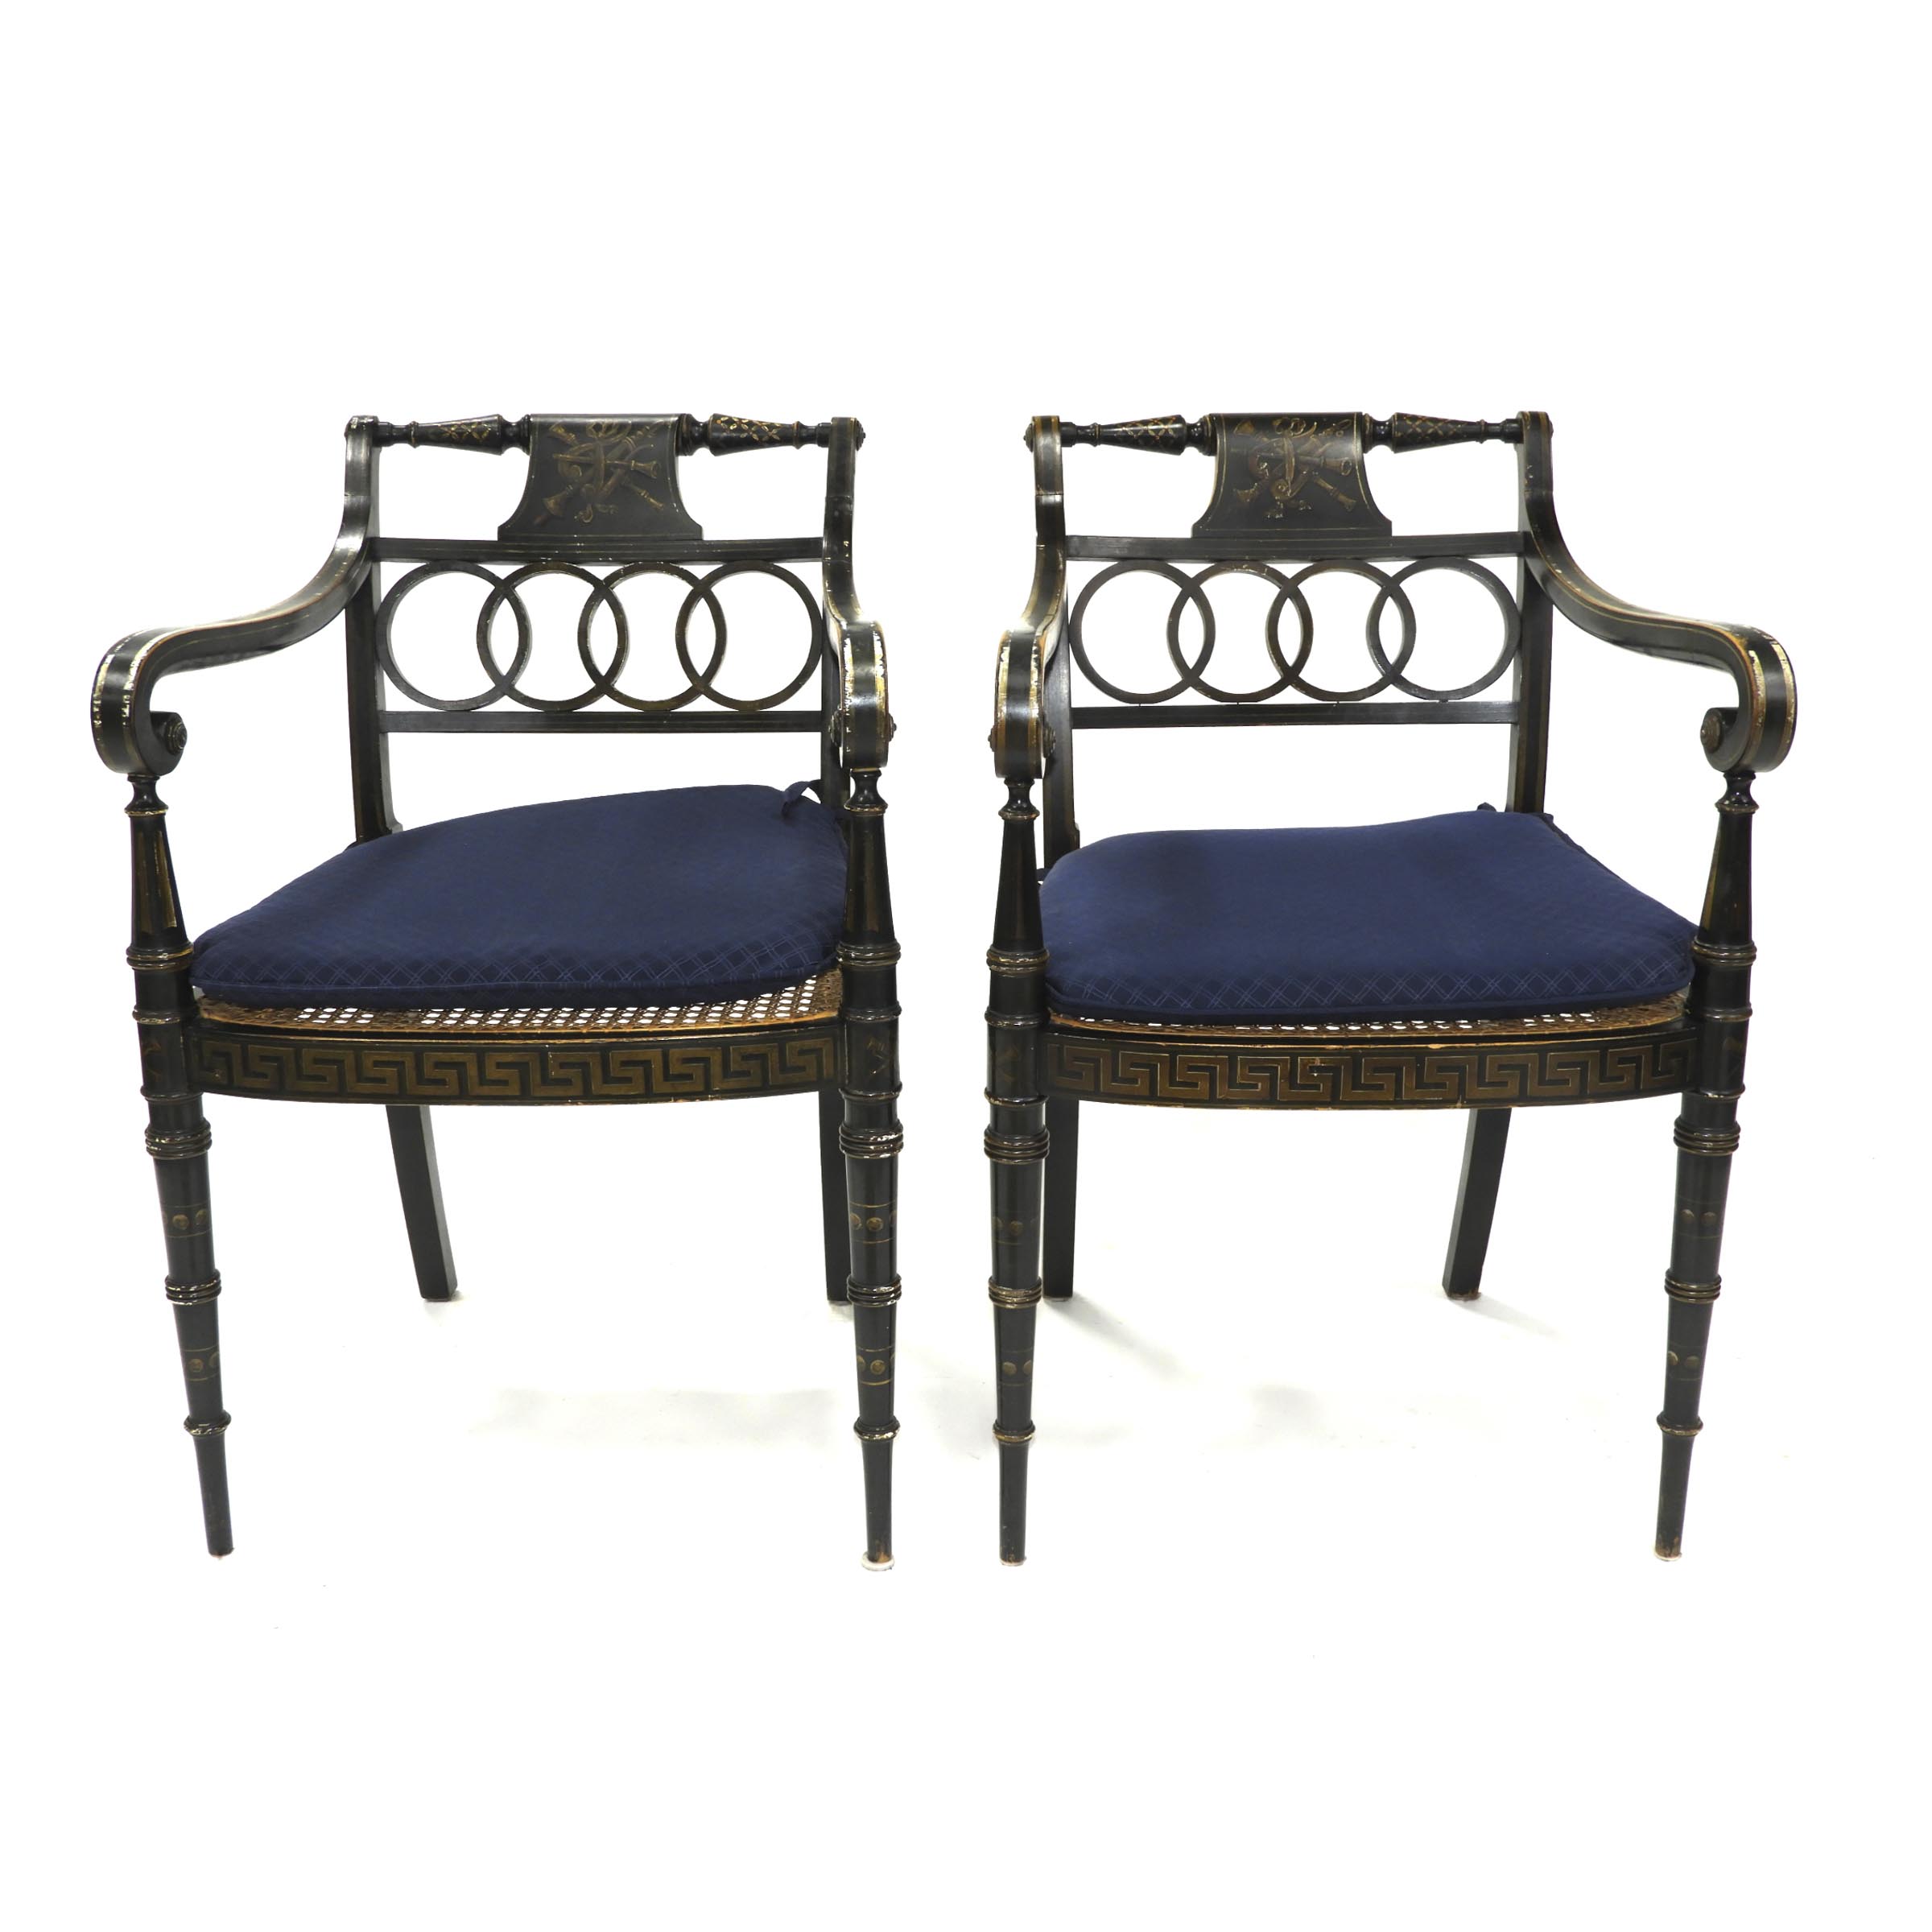 Pair of French Directoire Ebonized and Parcel Gilt Open Armchairs, early 19th century